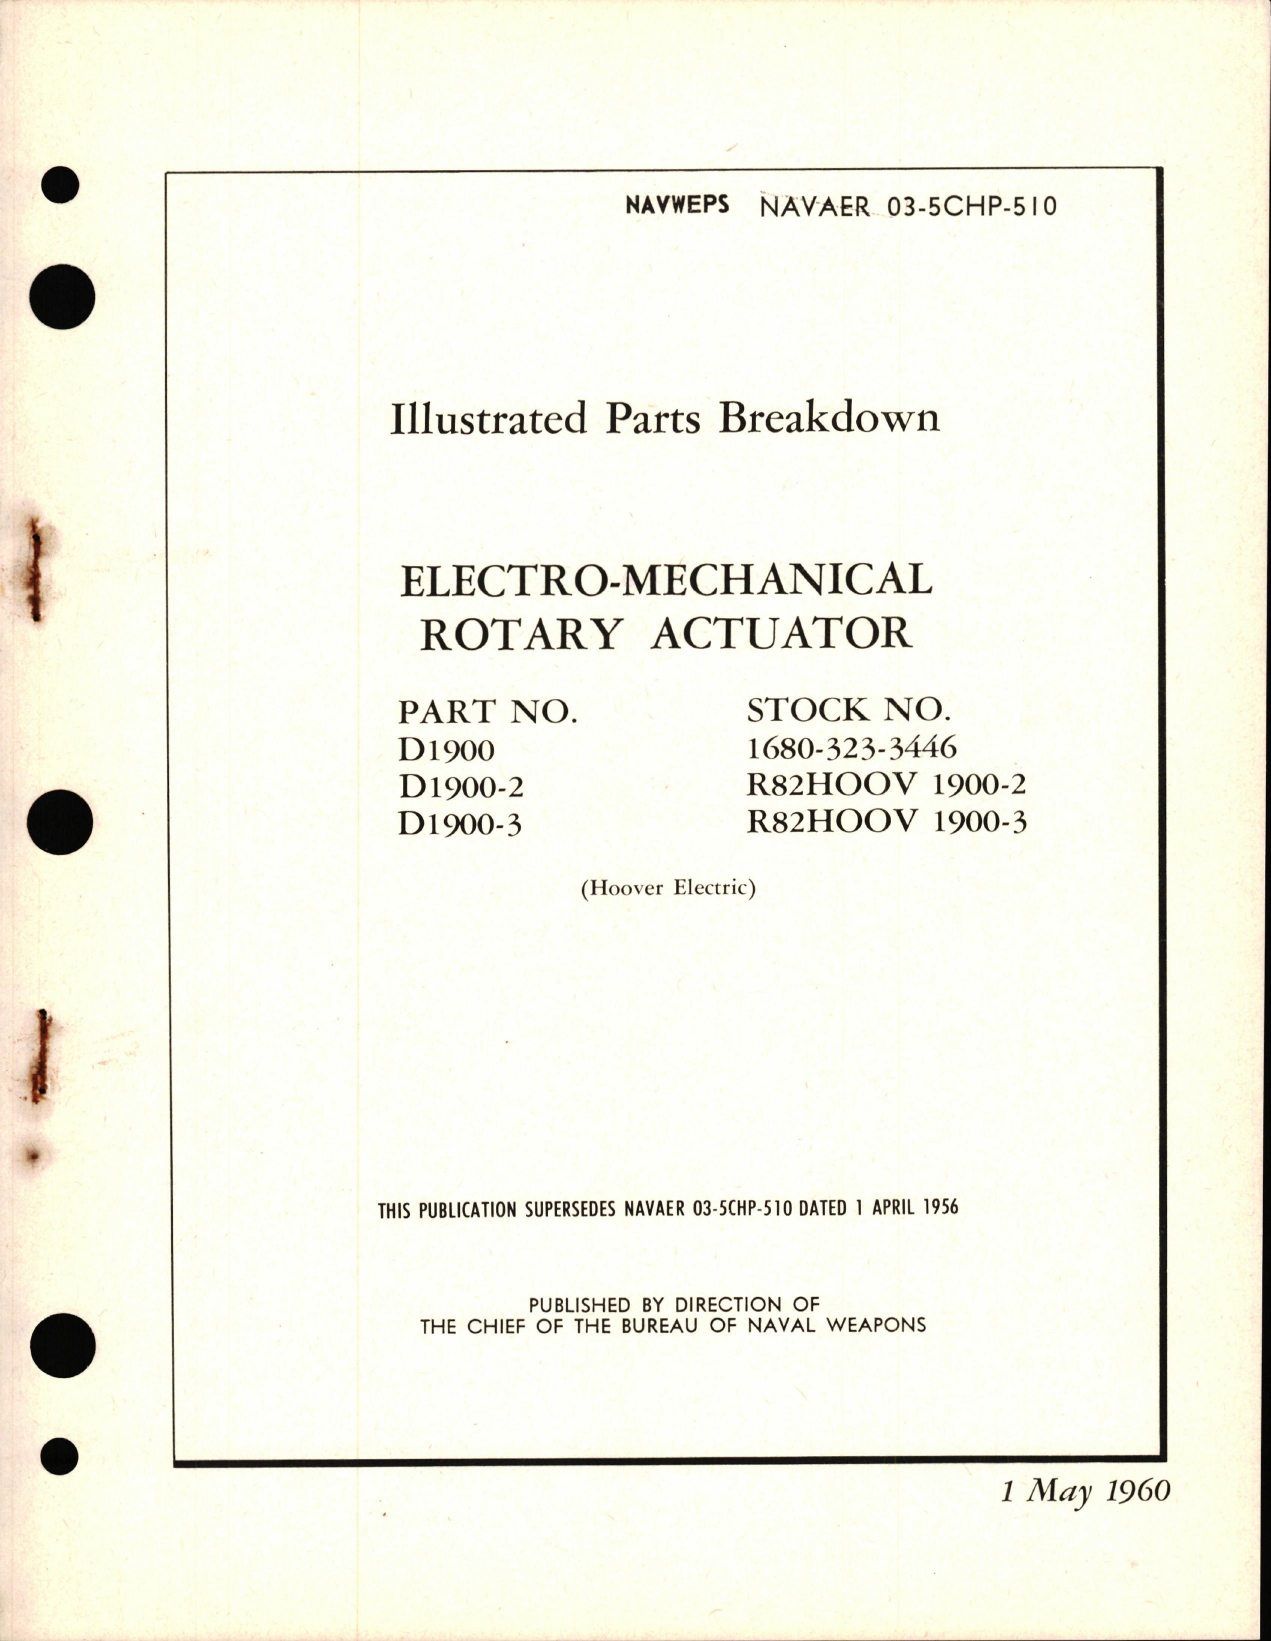 Sample page 1 from AirCorps Library document: Illustrated Parts Breakdown for Electro-Mechanical Rotary Actuator Part D1900, D1900-2, and D1900-3 